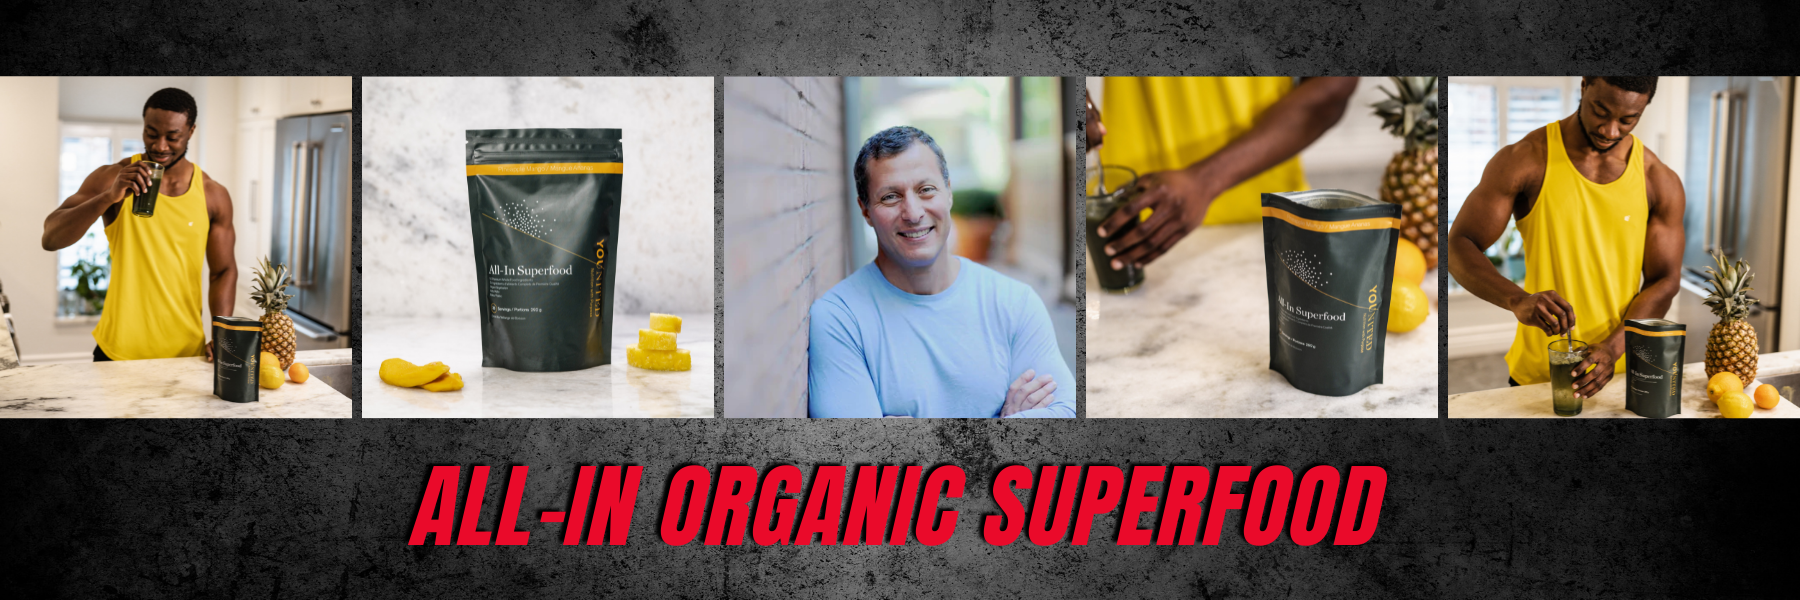 All-In Organic Superfood